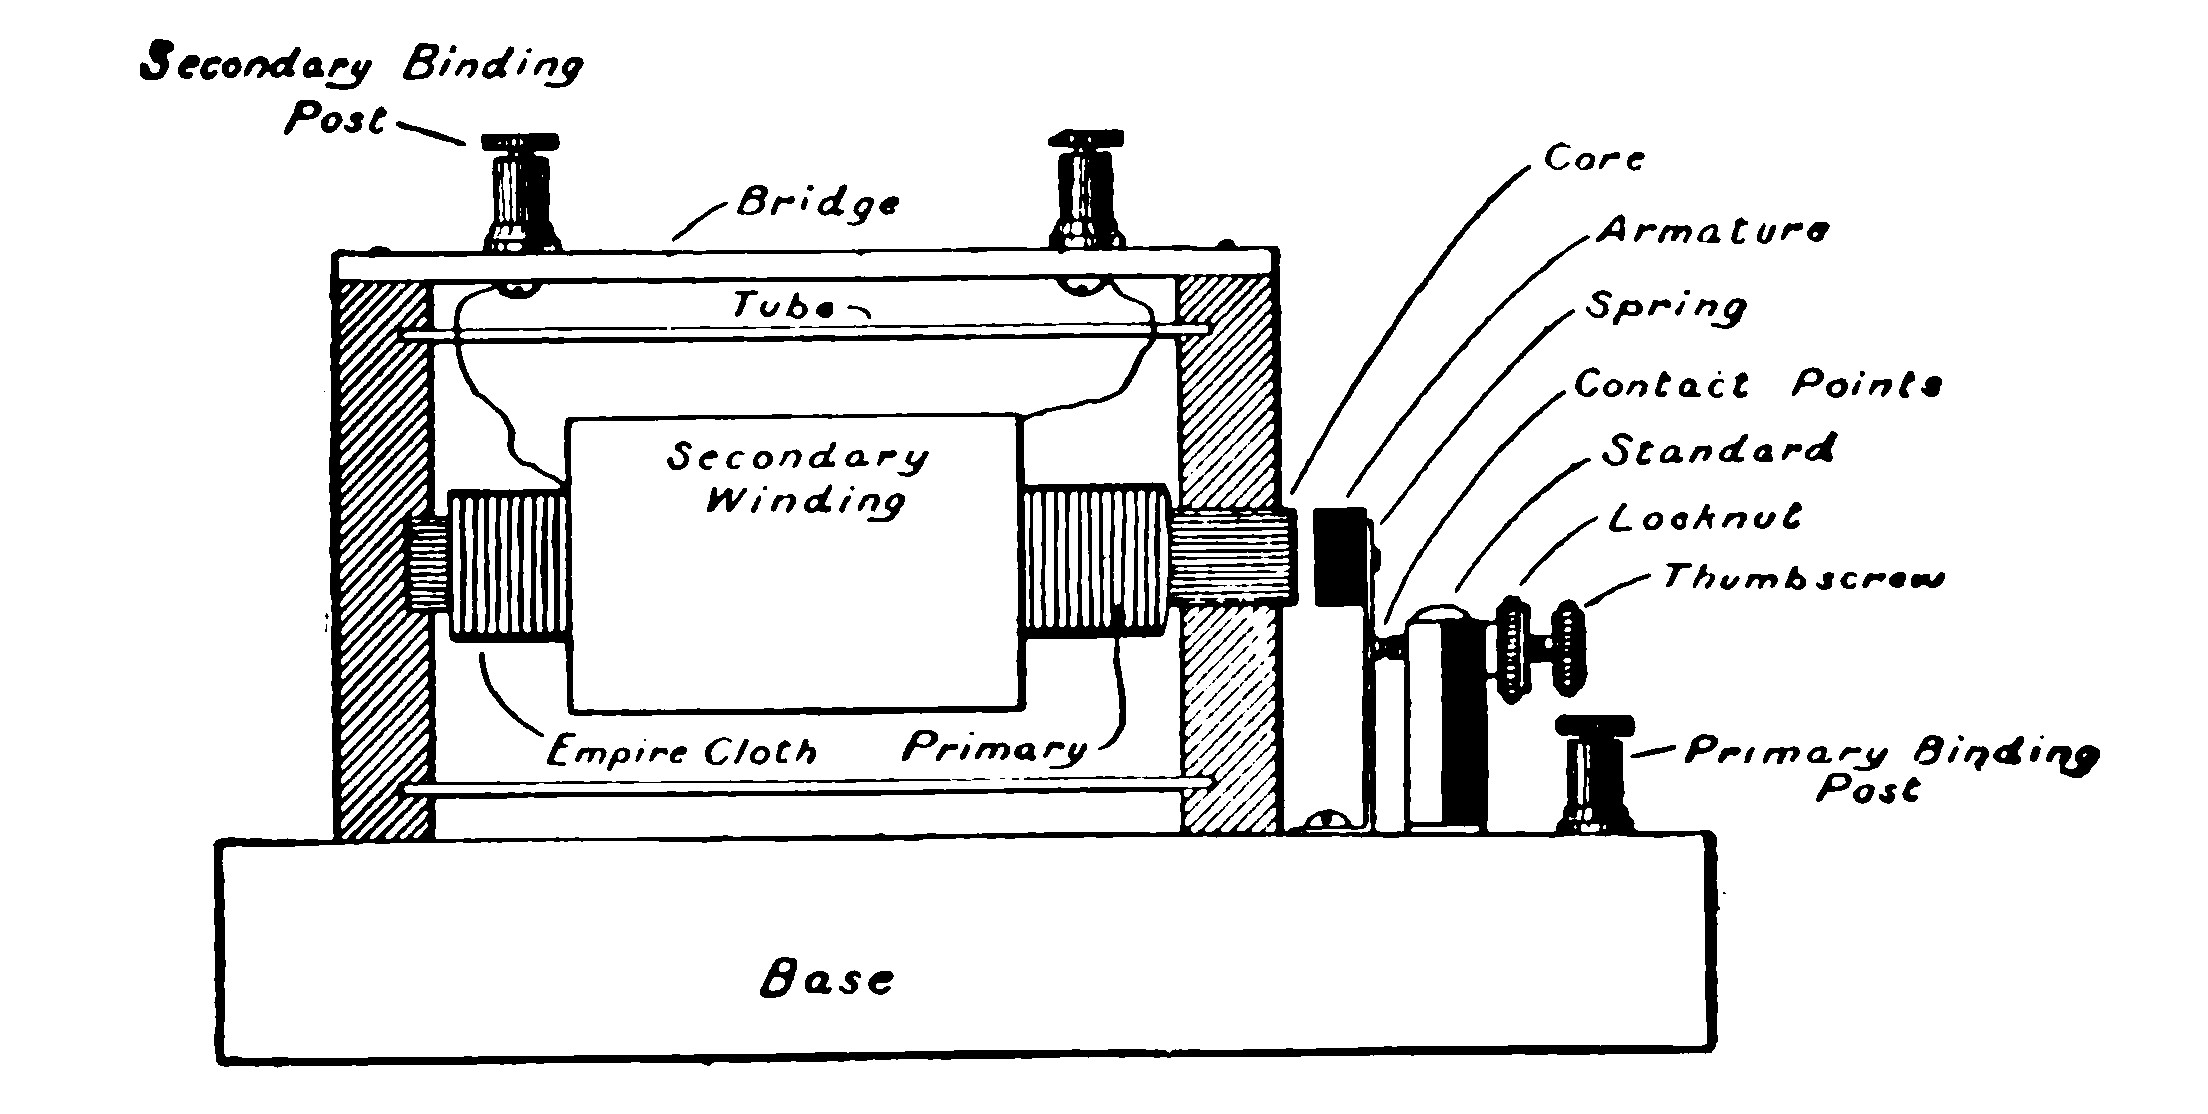 FIG. 118.—Section of the Spark Coil showing the arrangement of the Parts.